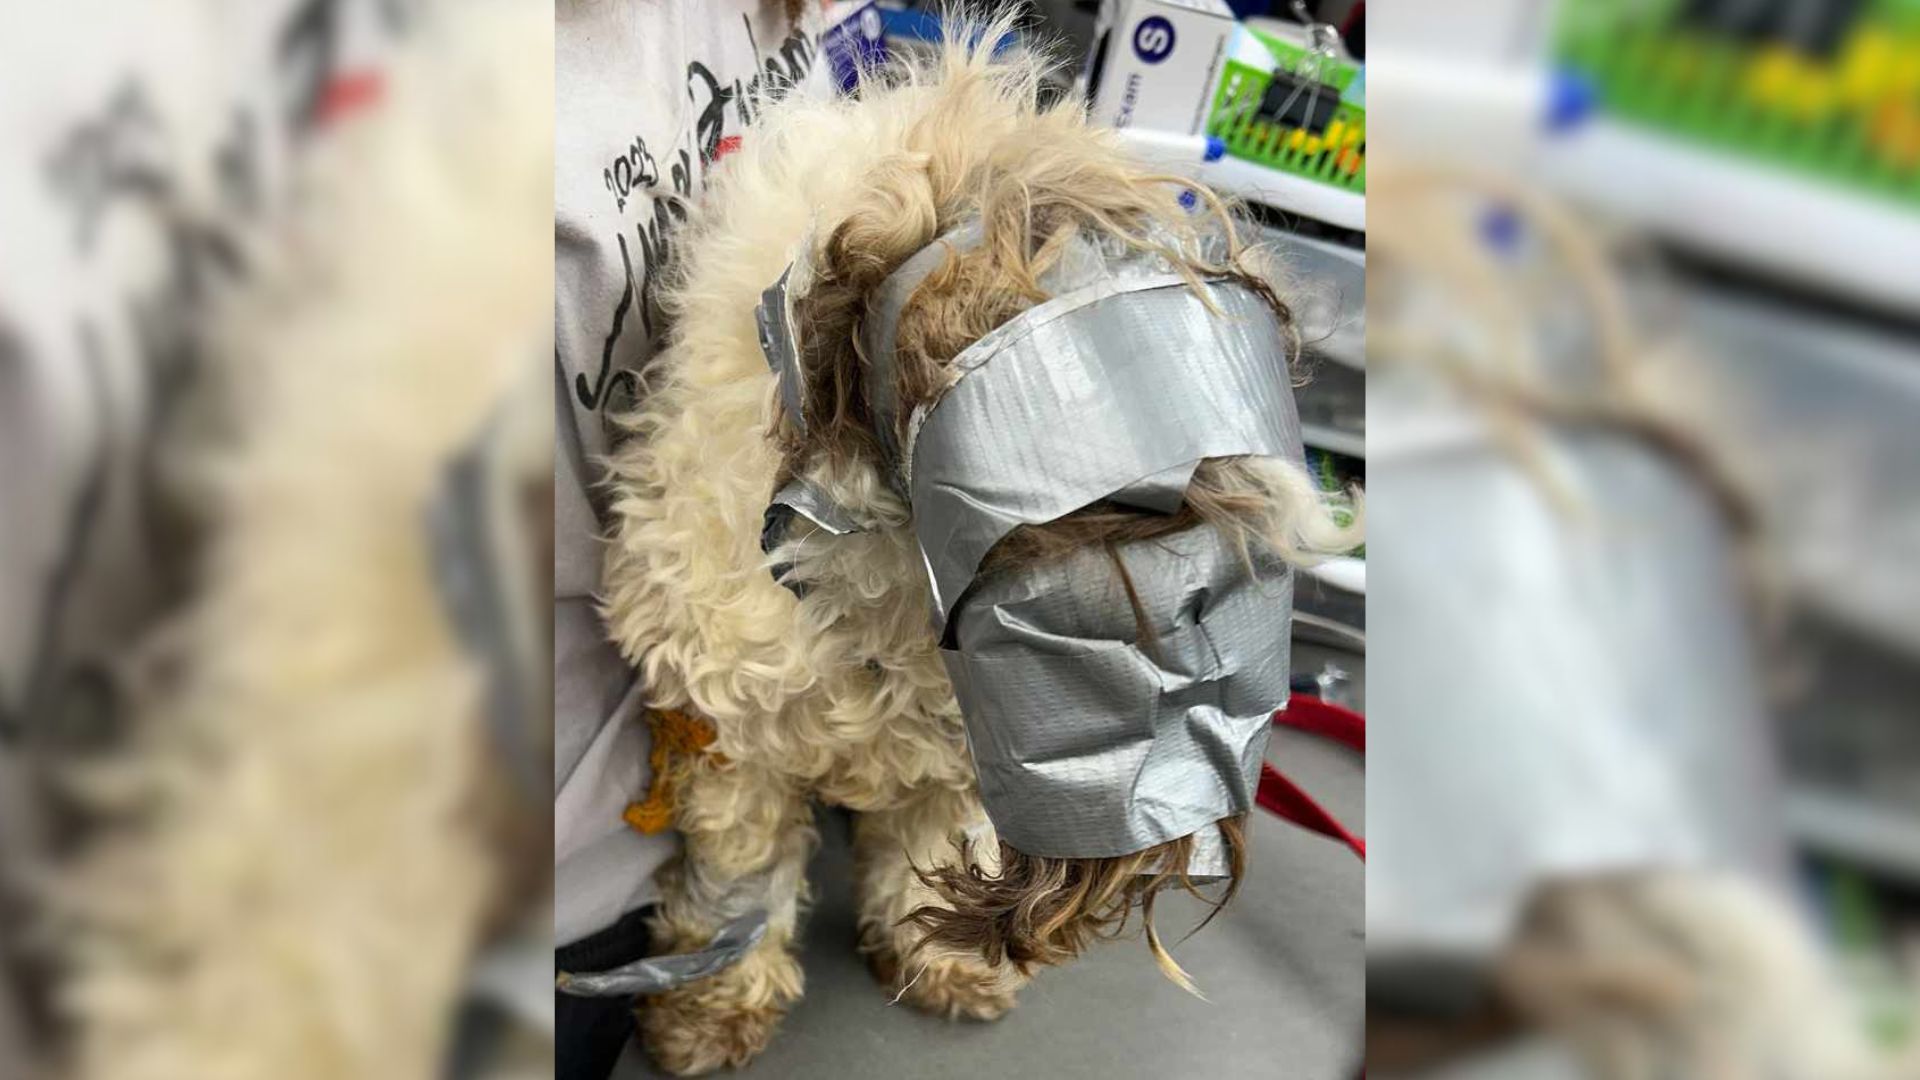 Missing Dog Found In Dumpster With His Face And Body Wrapped In Duct Tape Cries For His Mum